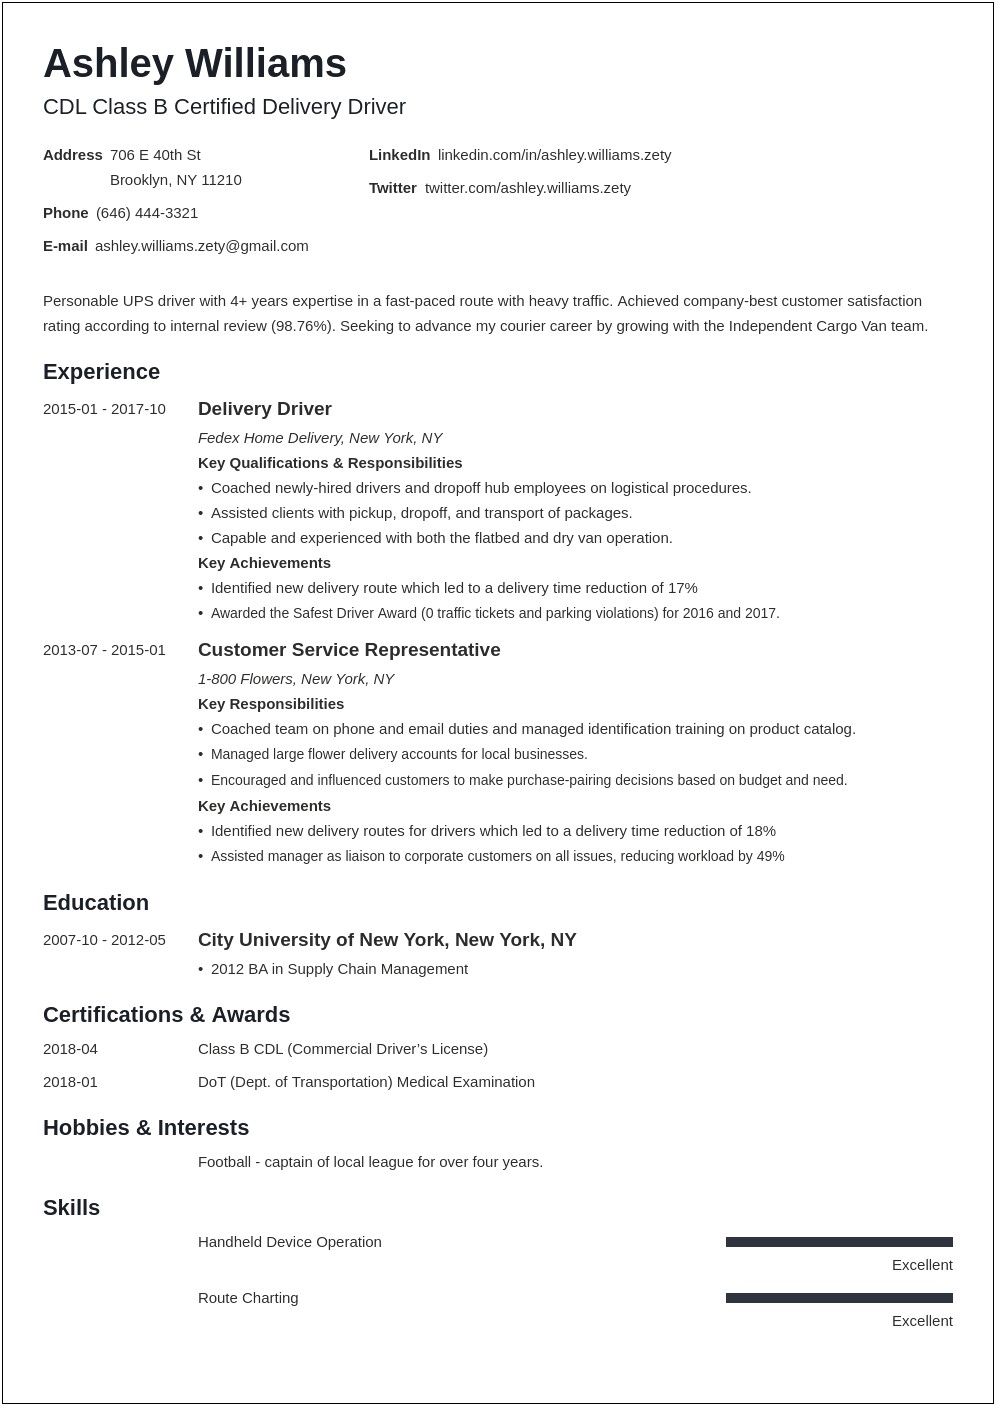 Resume Objective For Ups Driver Helper